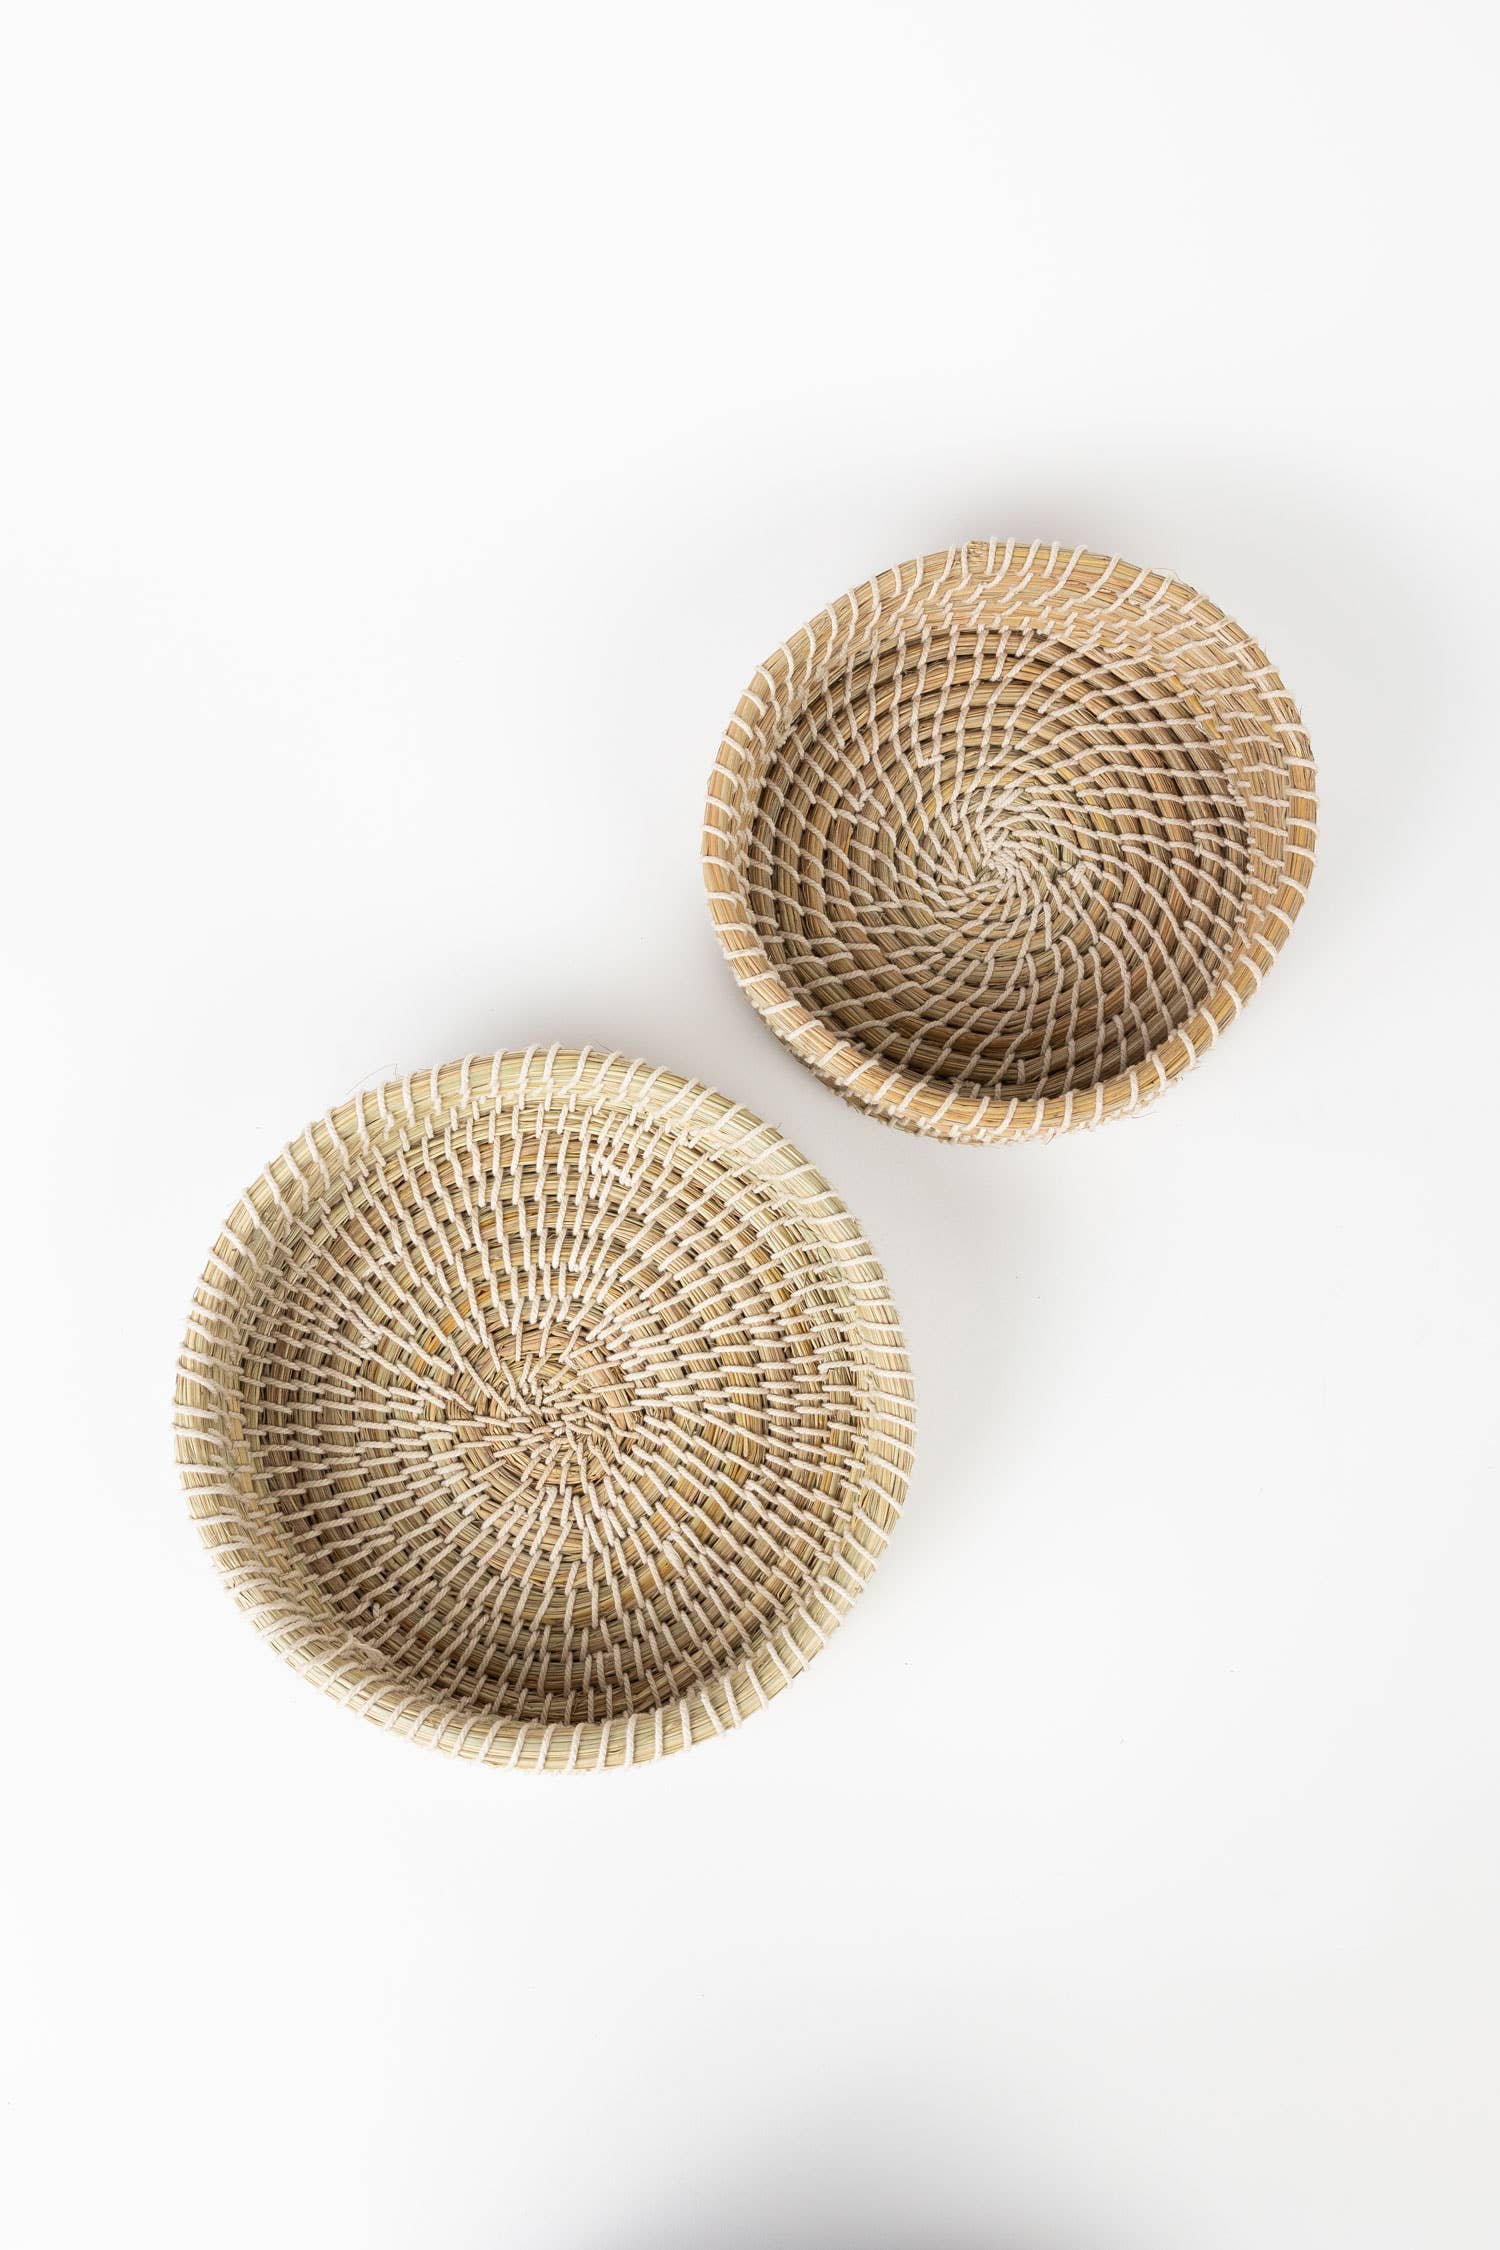 Ten Thousand Villages - Kaisa Grass Tray 10''  Ten Thousand Villages   -better made easy-eco-friendly-sustainable-gifting